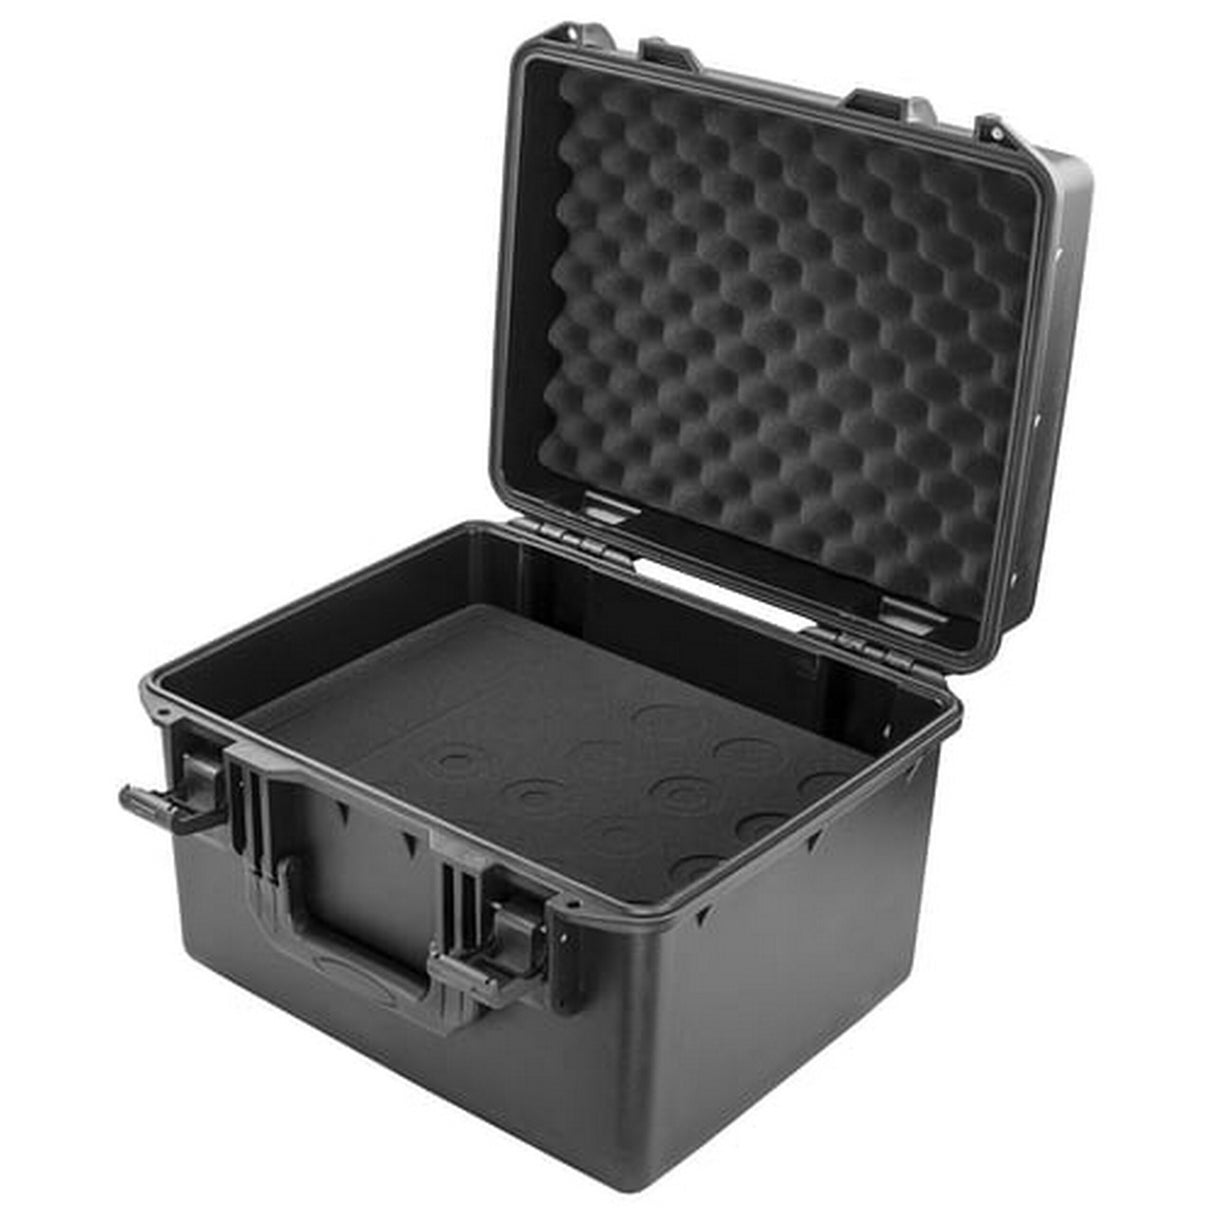 Odyssey VUMIC16 Handheld Microphone Case for 16 with Storage Compartment